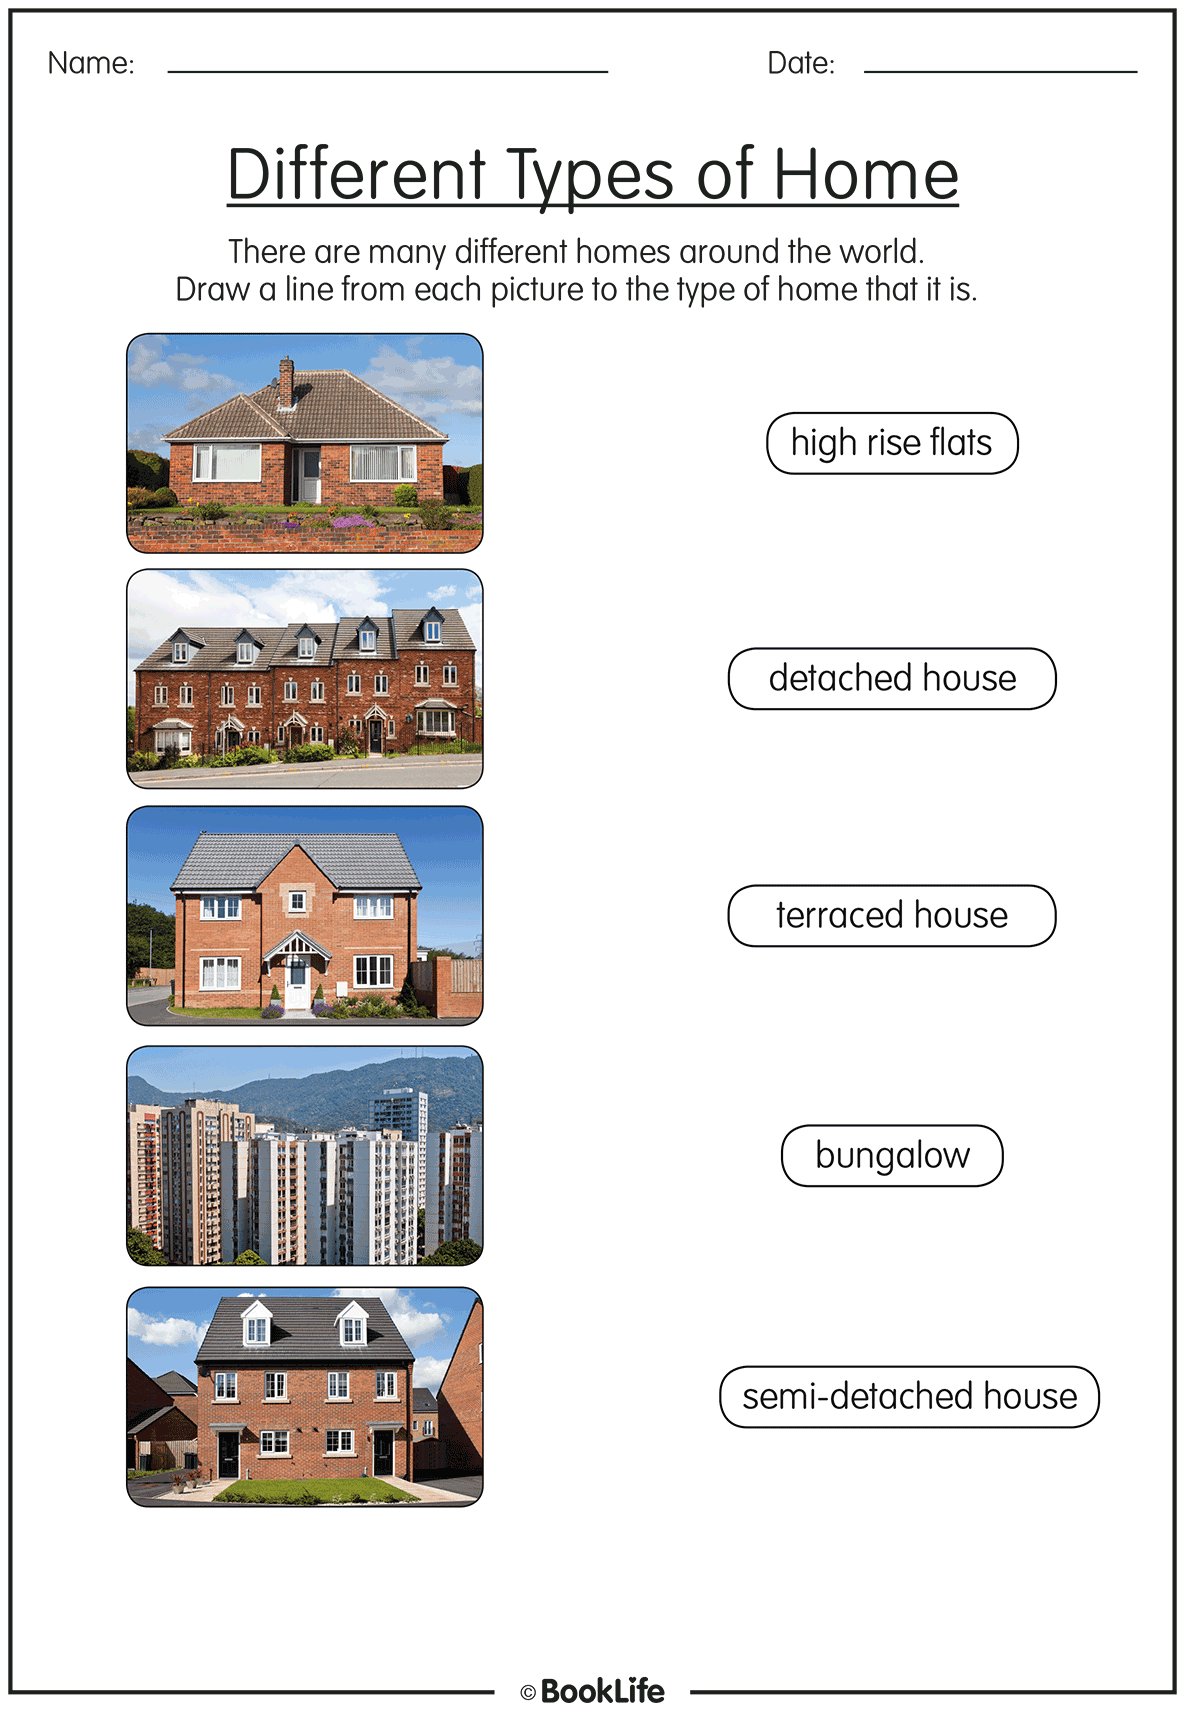 Different Types of Homes by BookLife